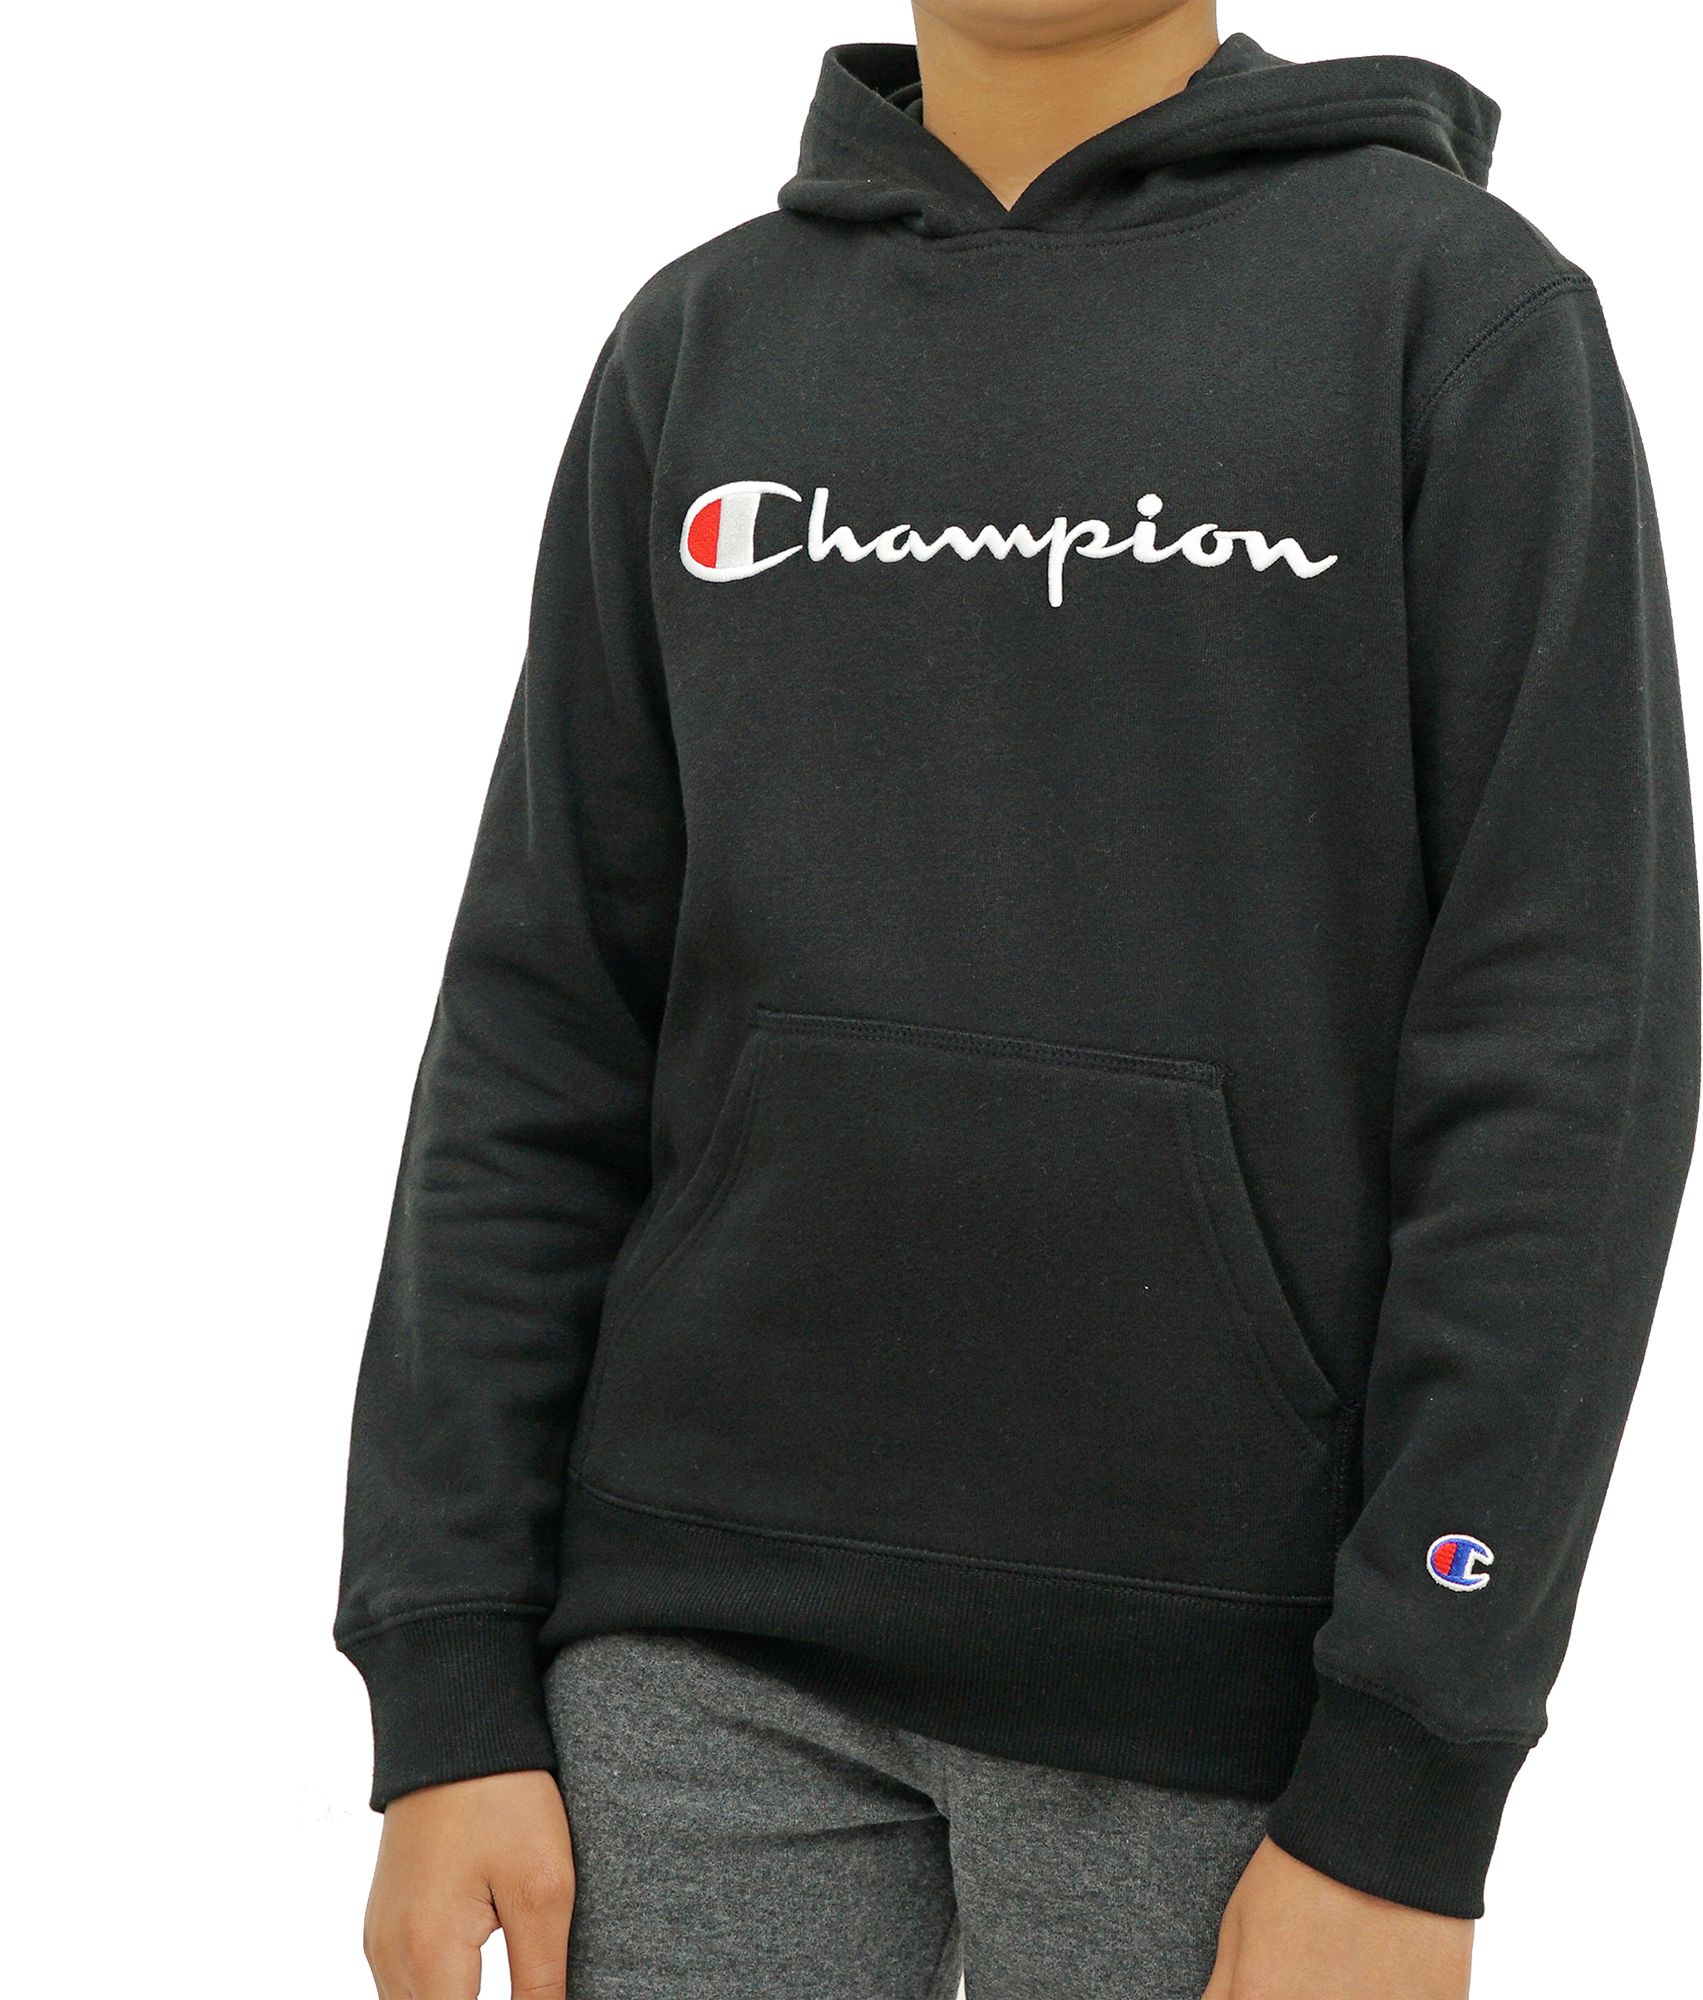 stores that carry champion brand